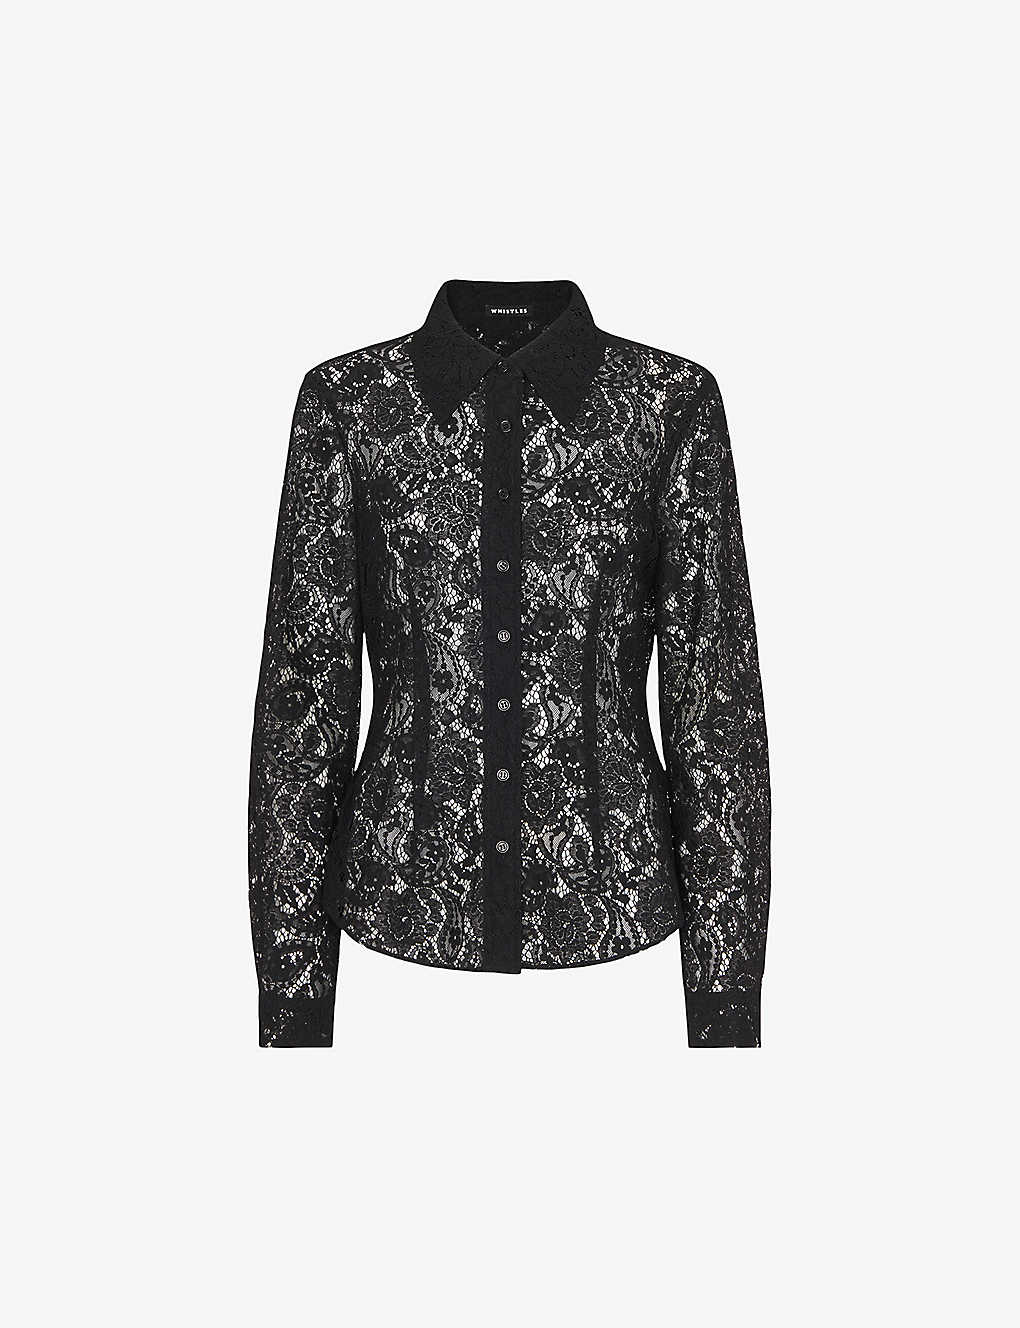 Whistles Womens Black Lucy Lace Shirt